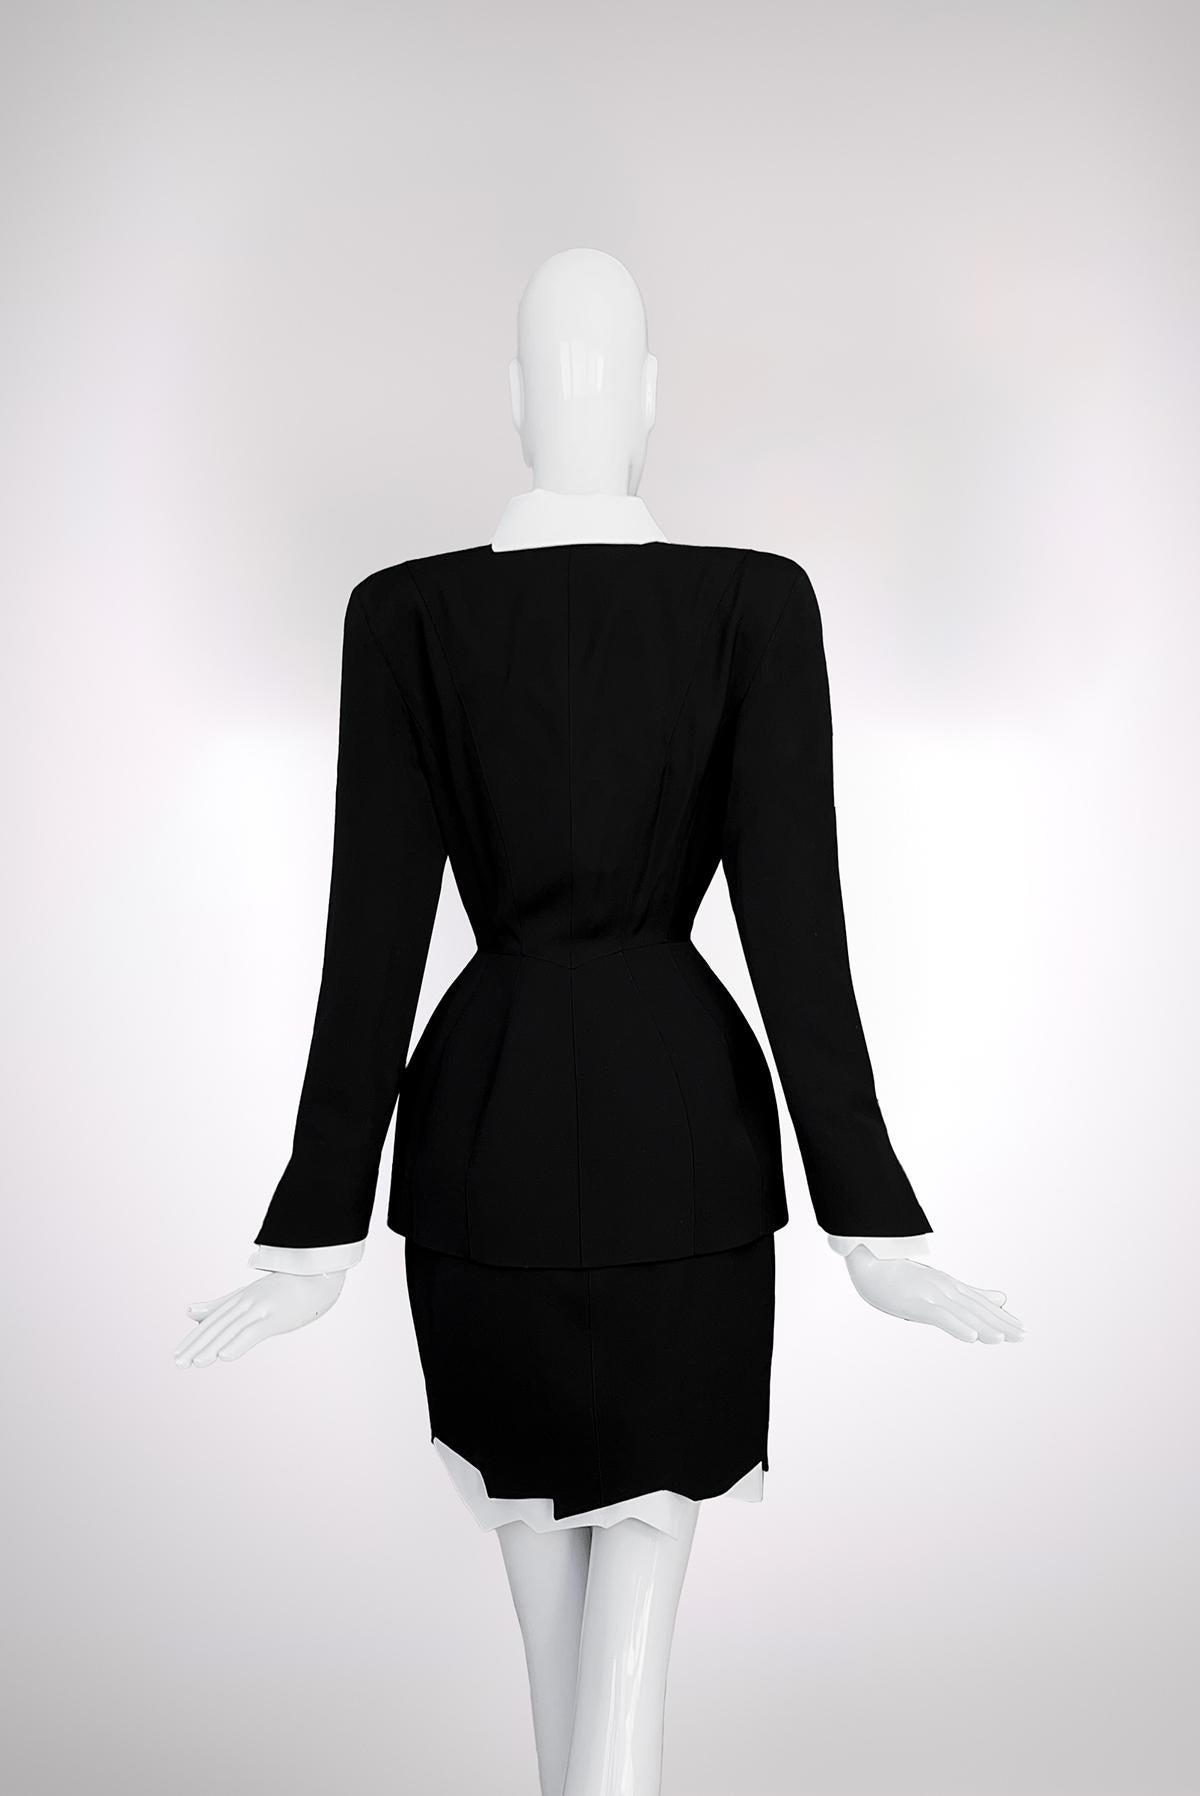 Thierry Mugler SS1994 Archival Iconic Runway Suit Sculptural ZigZag Jacket Skirt For Sale 5